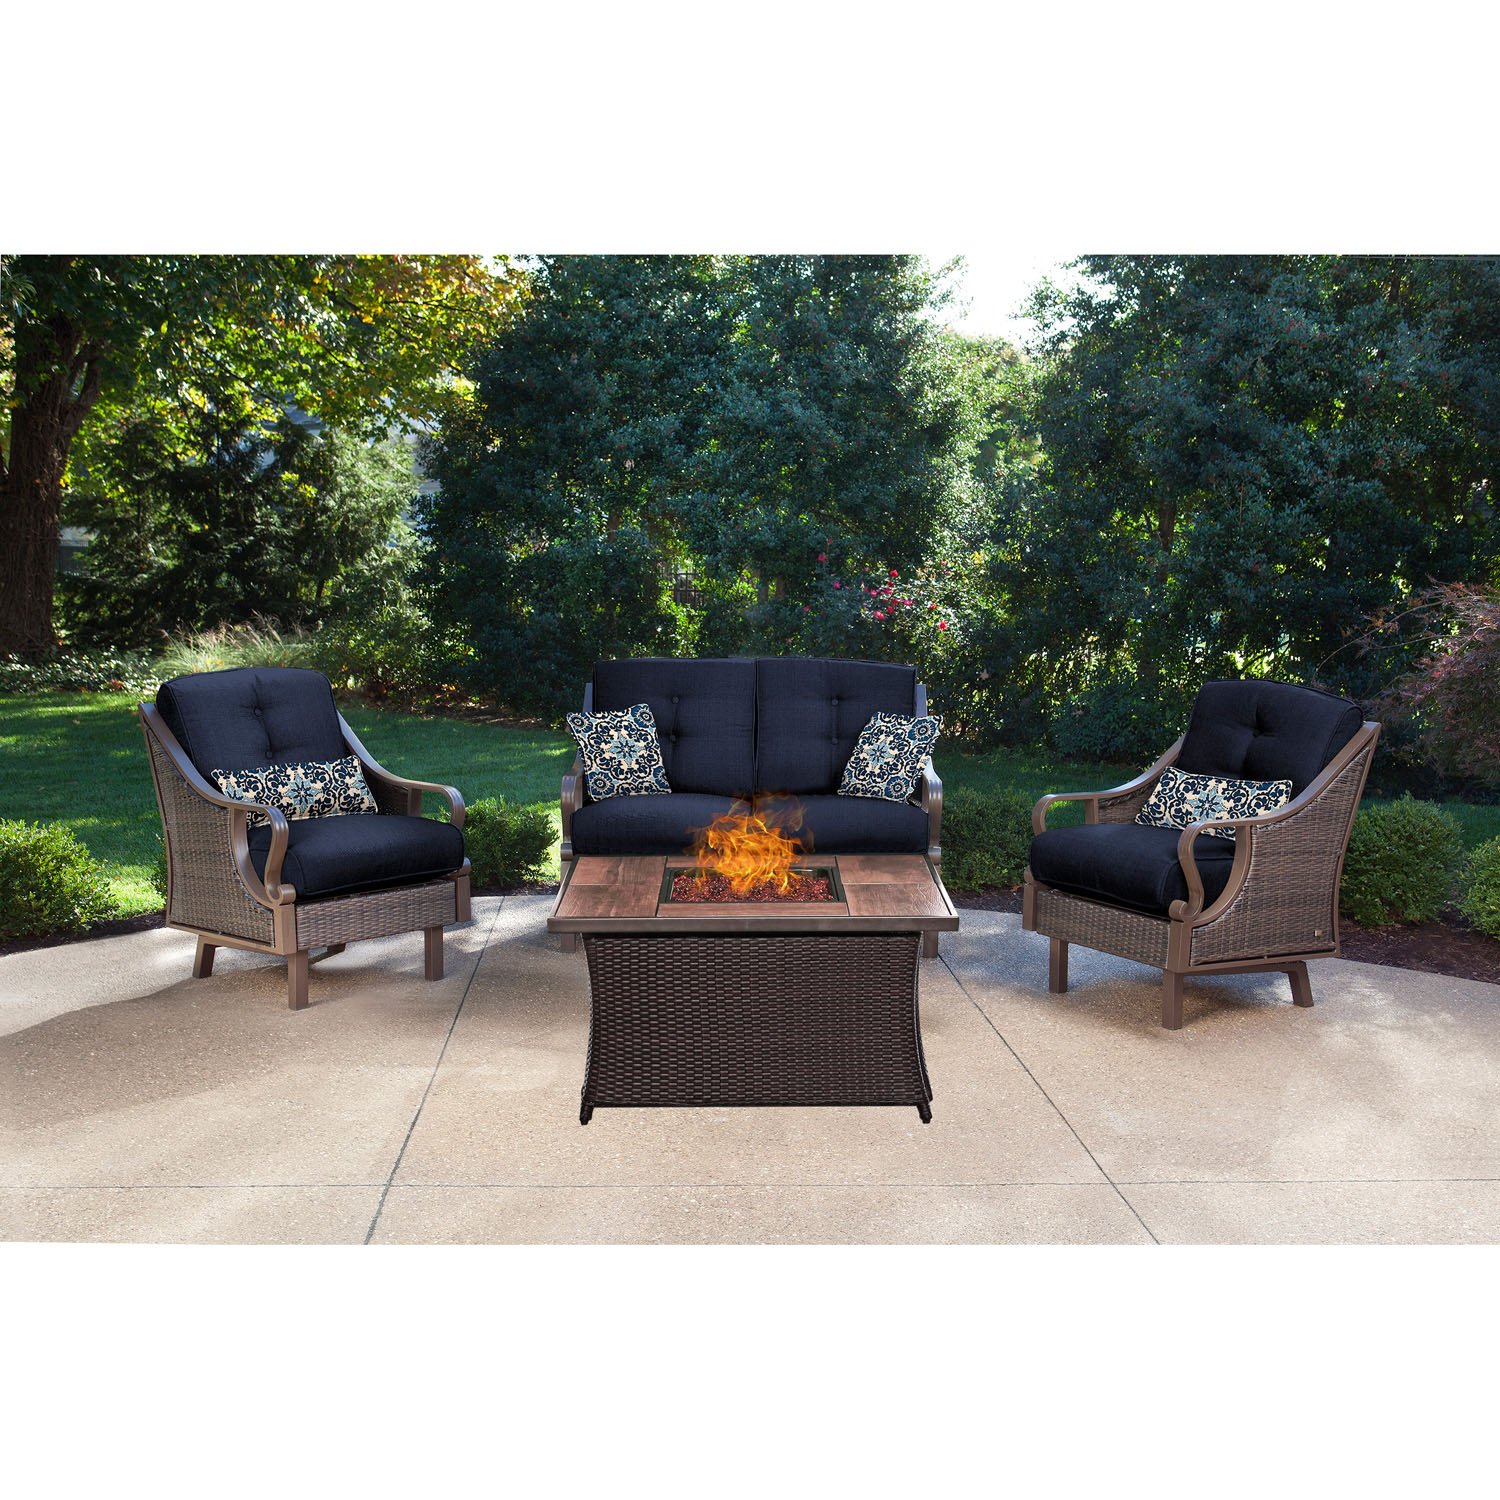 Hanover Ventura 4 Pcs Wicker and Steel Propane Fire Pit Chat Set, Navy Blue - image 1 of 10